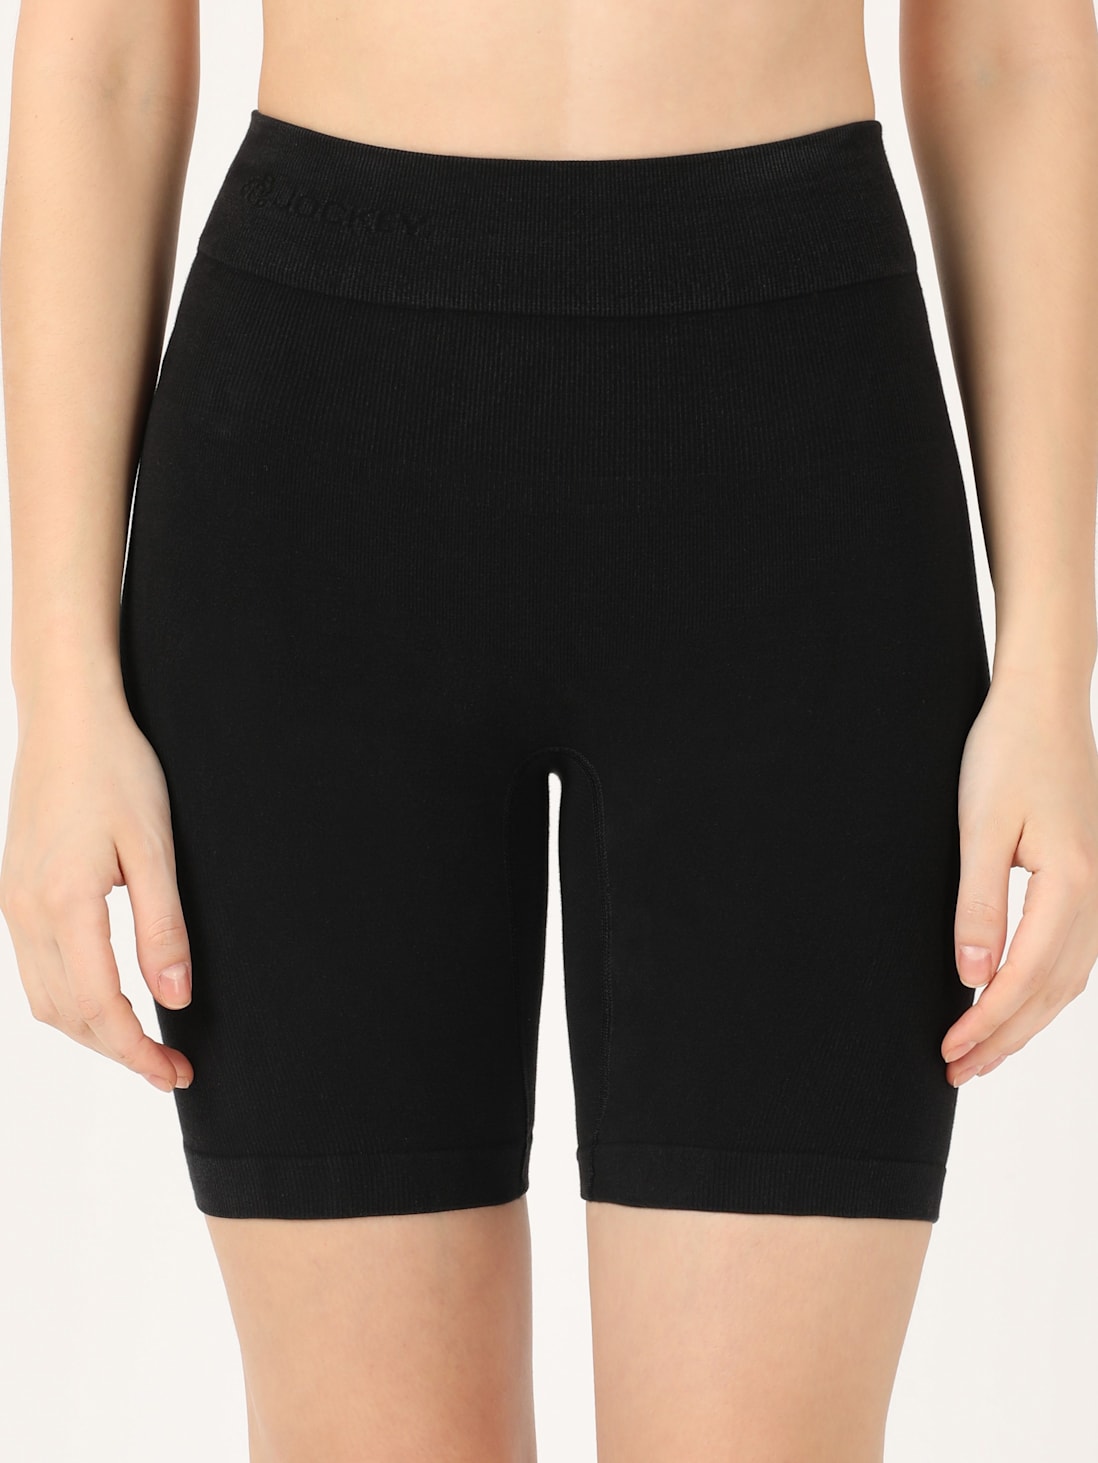 Women's Mid Waist Cotton Rich Elastane Stretch Seamfree Shorts Shapewear  with Breathable Inner Thigh Panel - Black